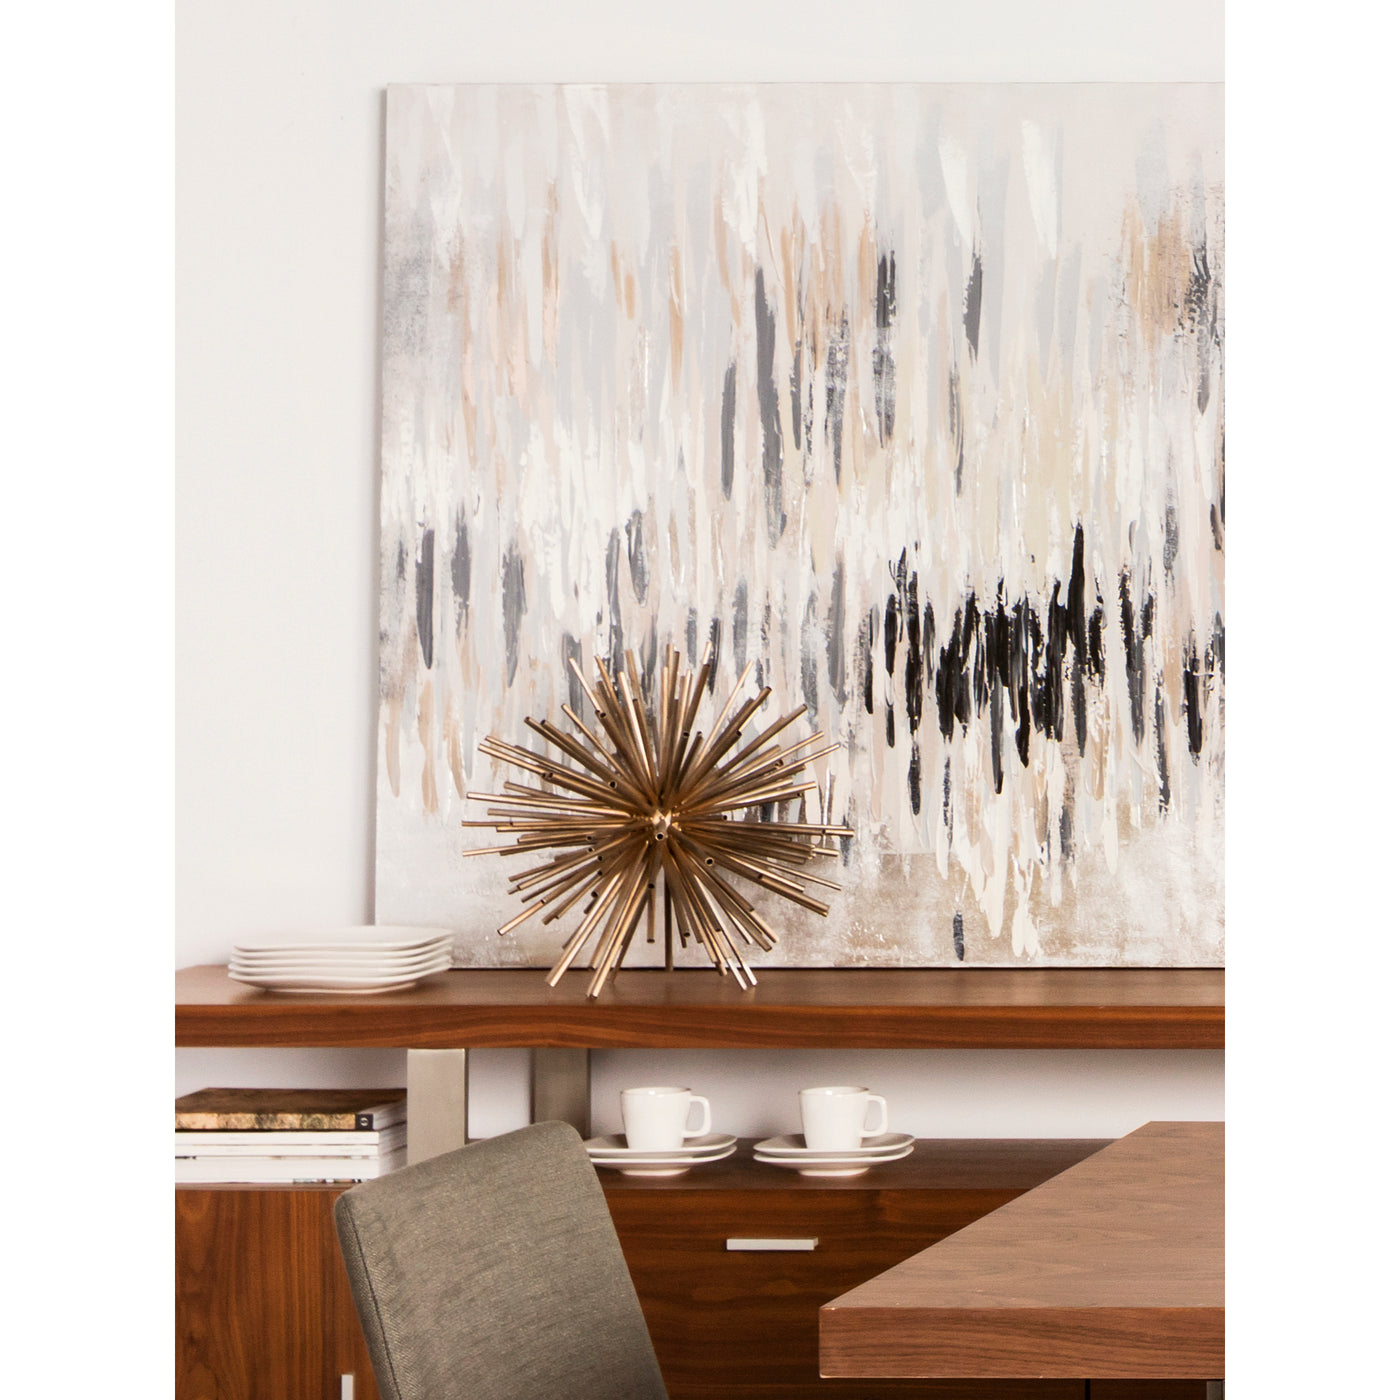 Add a three-dimensional aspect to your Décor with this contemporary, table-top art. Made of 100% iron and given a rich, go...